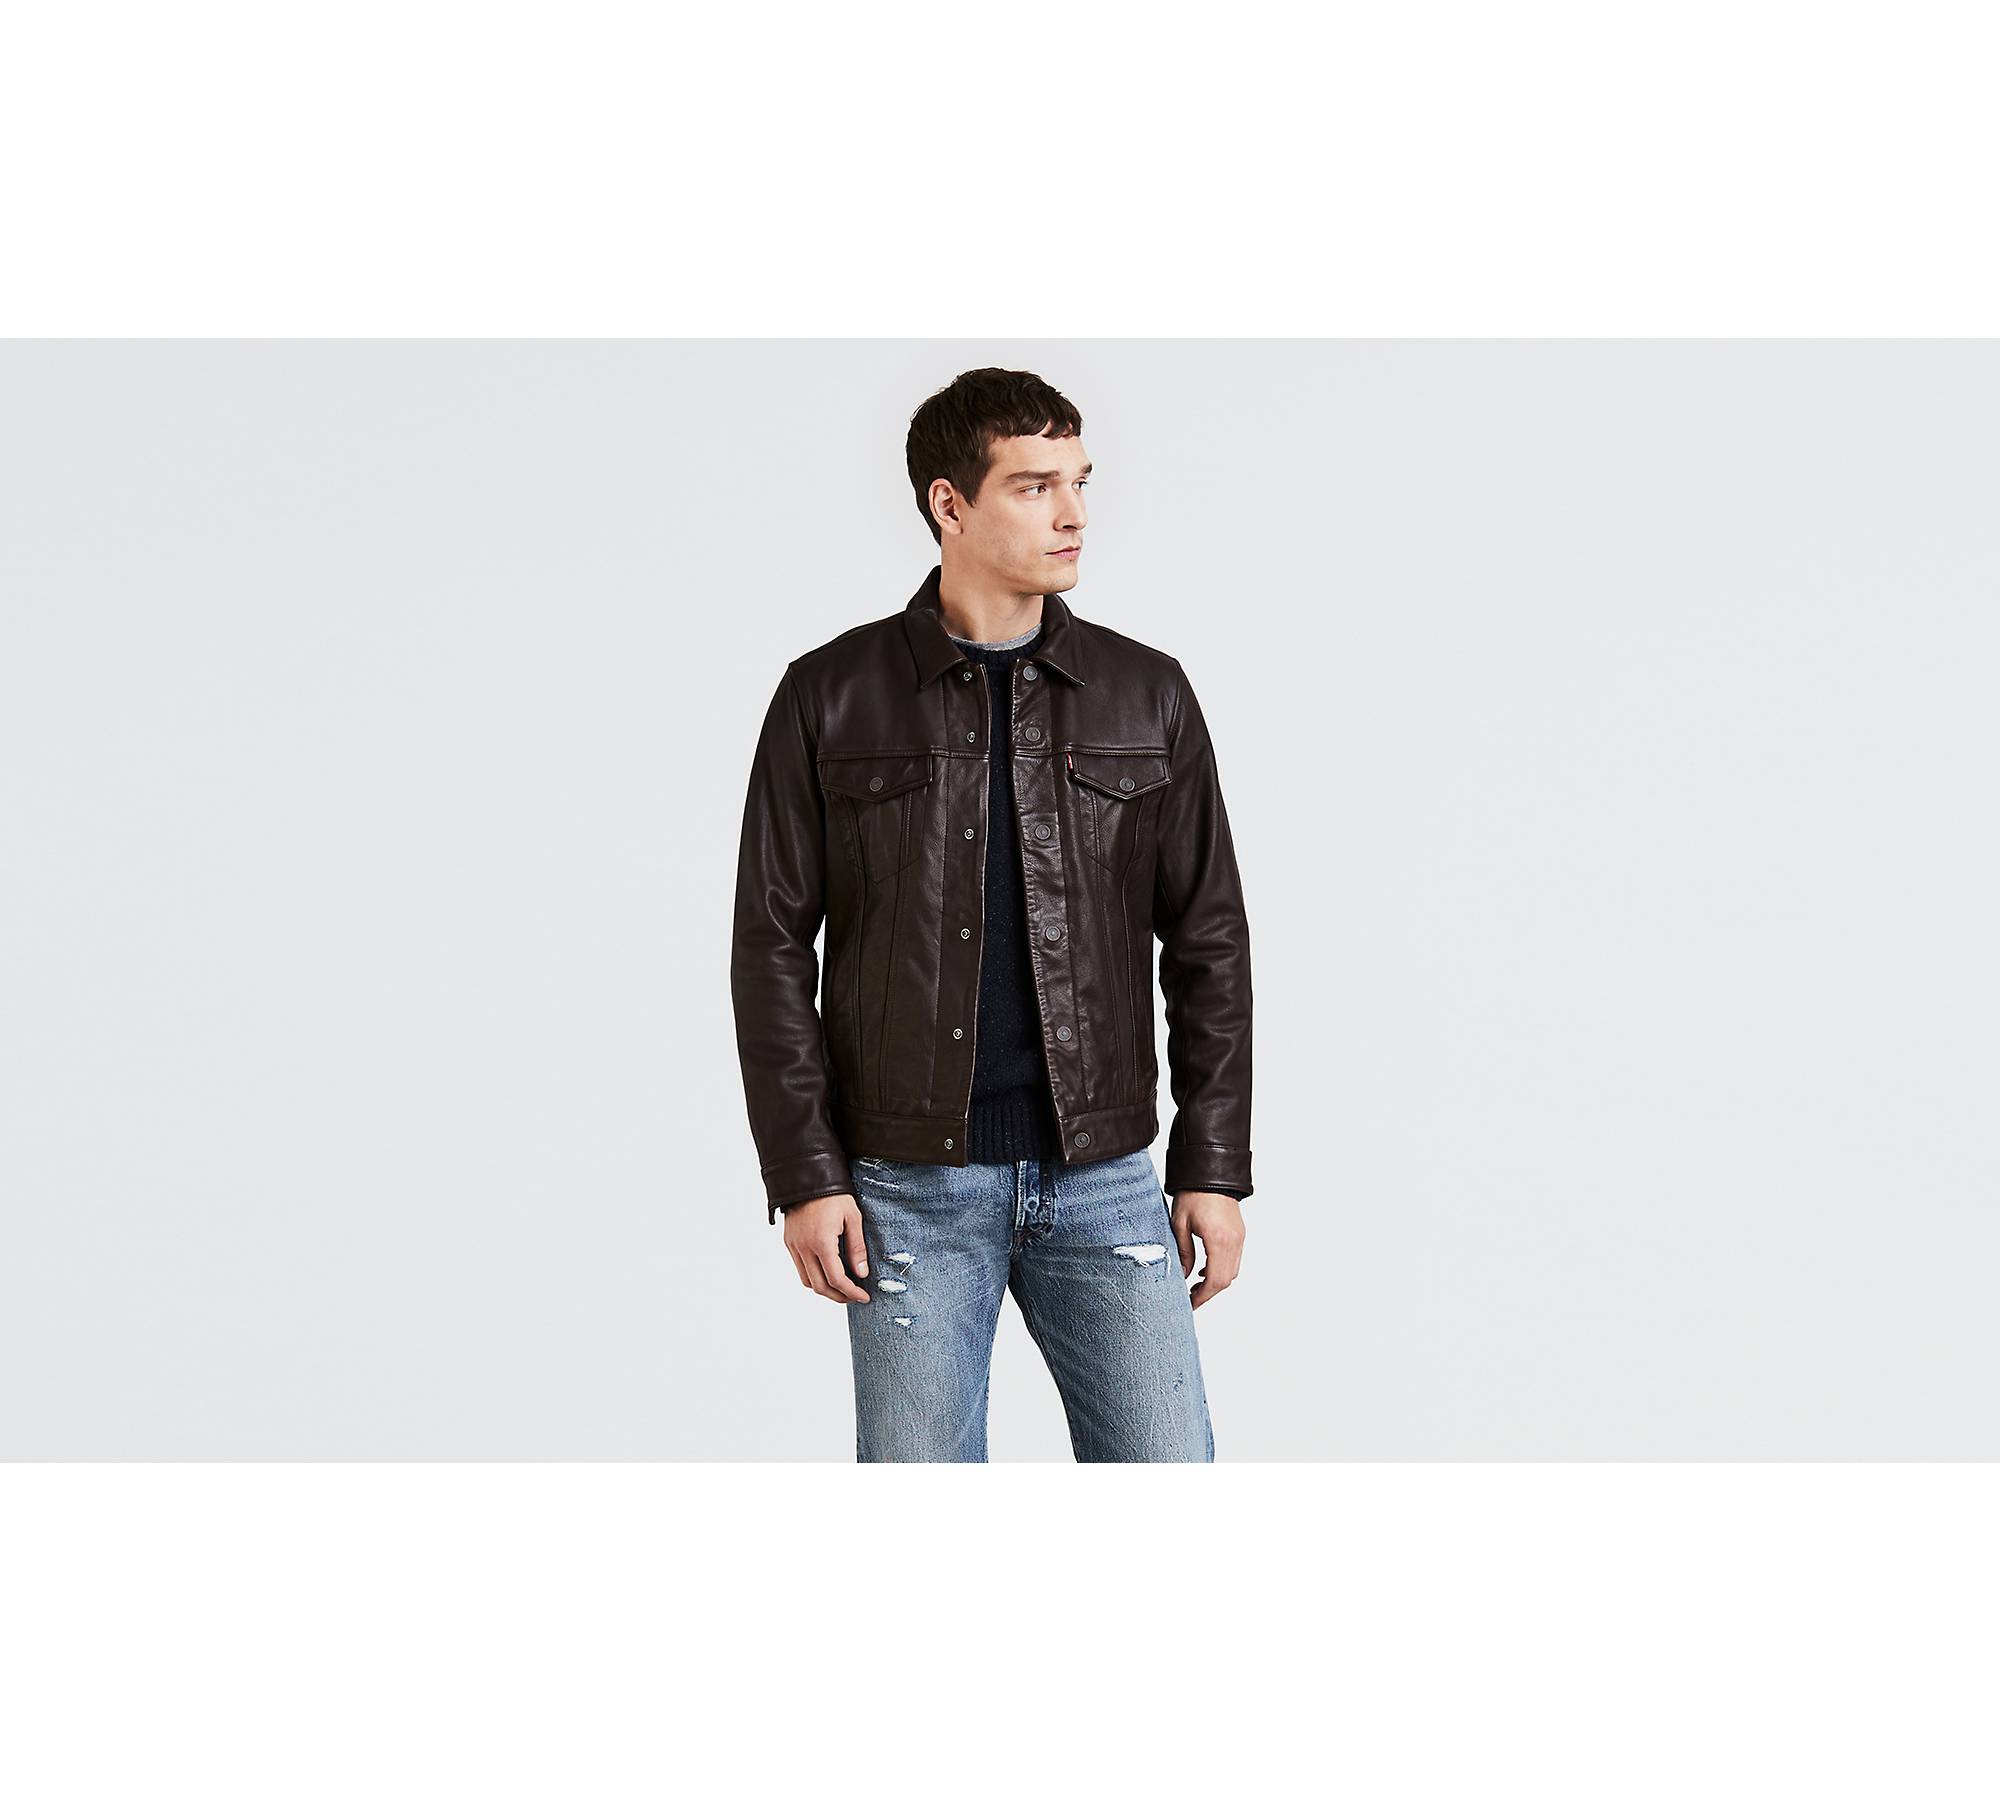 Good Wear Leather Coat Company — Wanted Zipper Parts